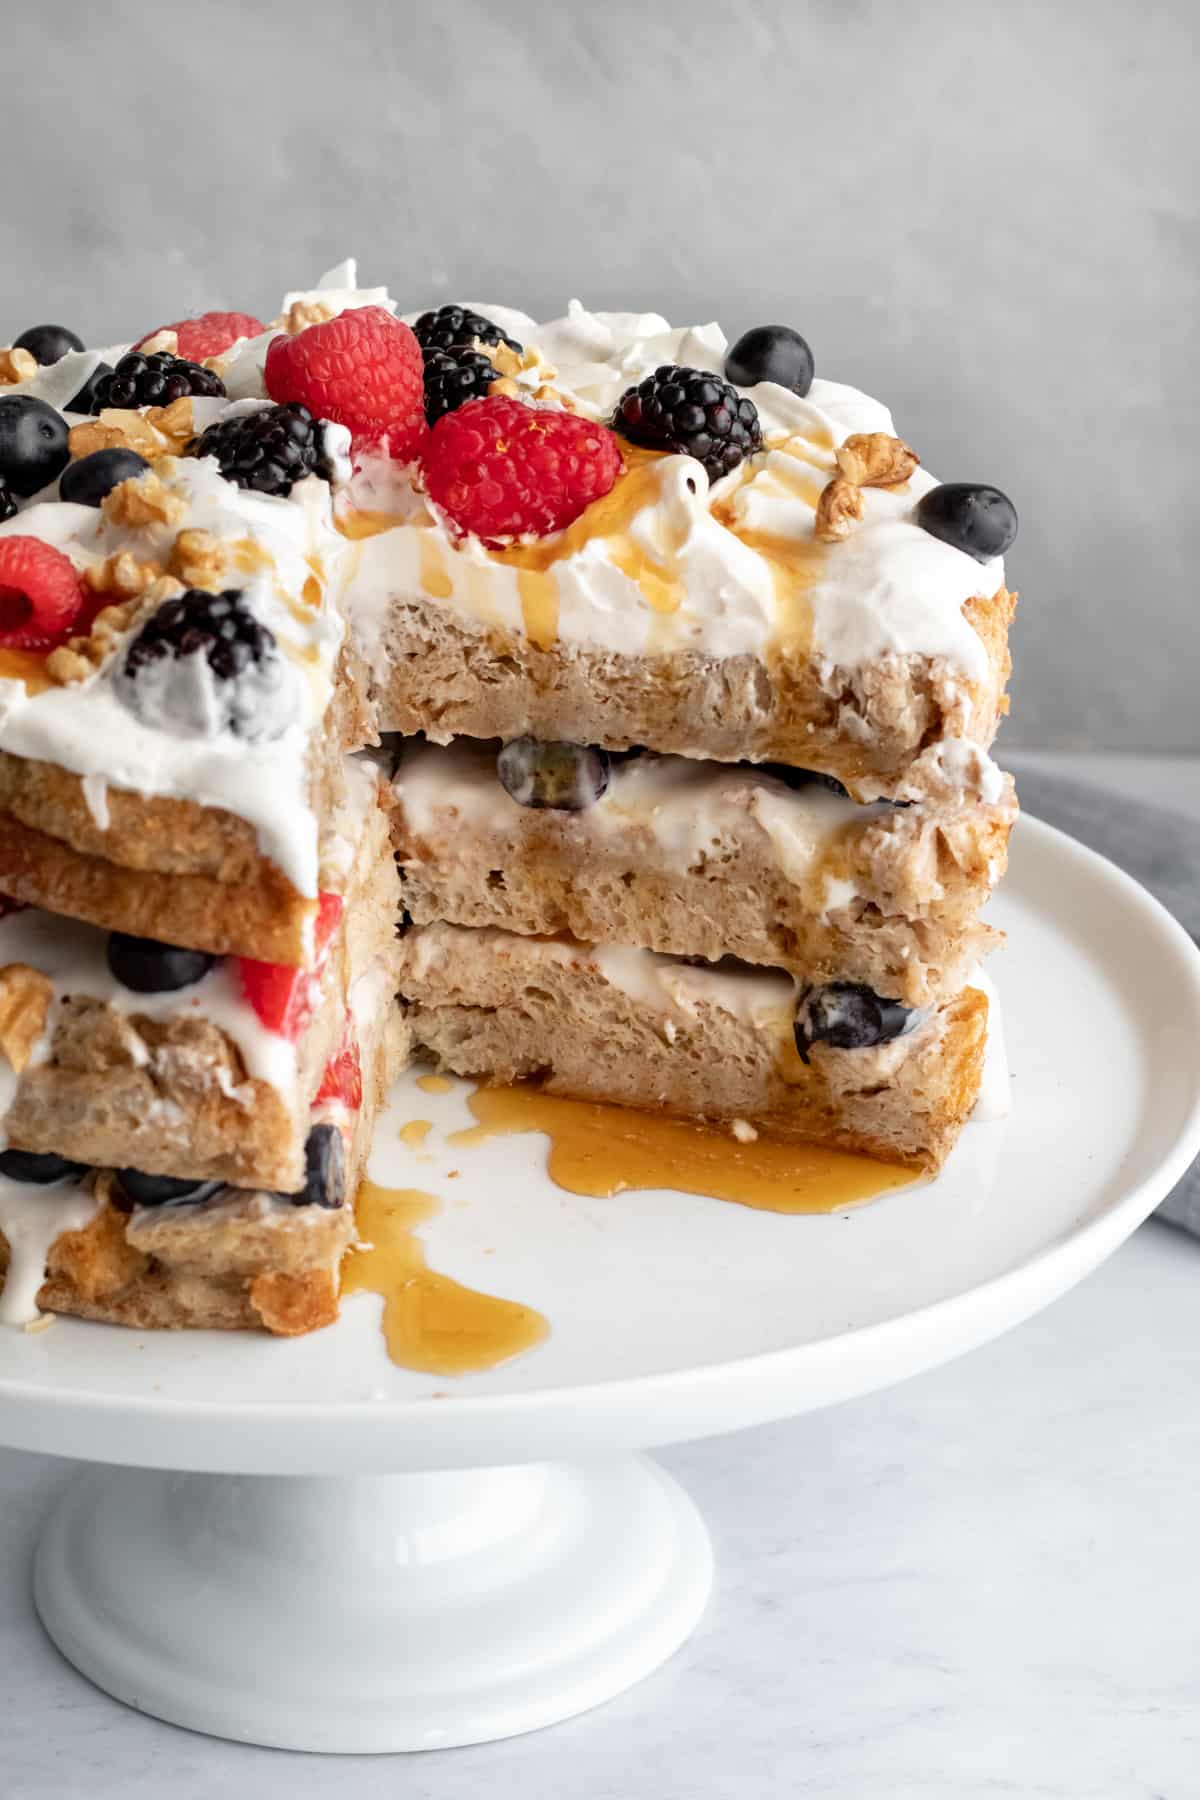 vegan french toast cake layered with yogurt and berries and drizzled with maple syrup